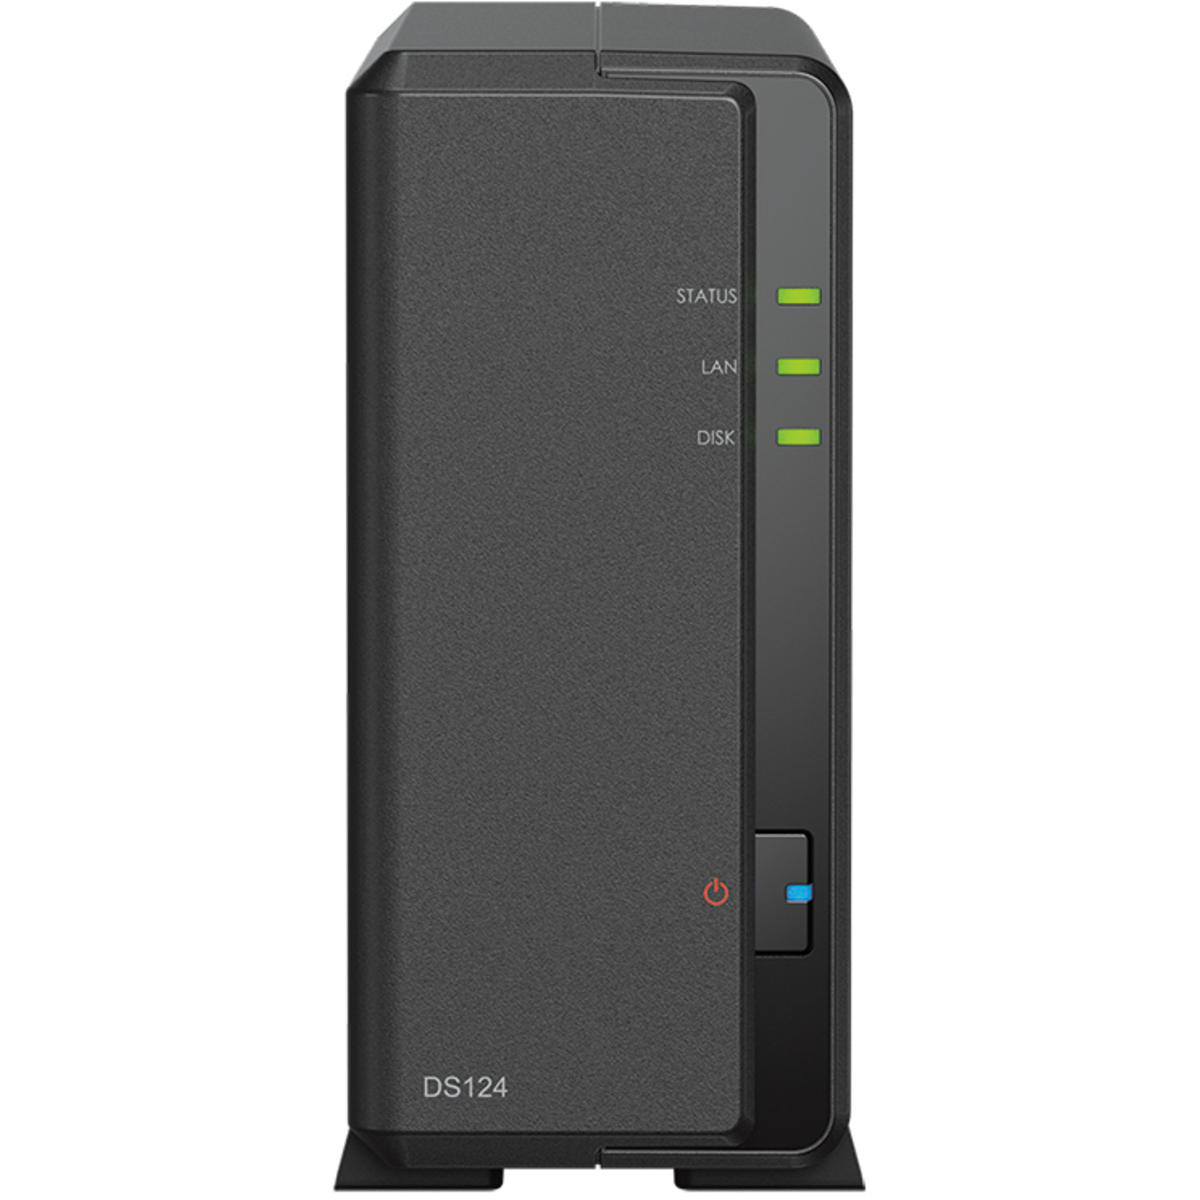 Synology DiskStation DS124 6tb 1-Bay Desktop Personal / Basic Home / Small Office NAS - Network Attached Storage Device 1x6tb Synology Plus Series HAT3300-6T 3.5 5400rmp SATA 6Gb/s HDD NAS Class Drives Installed - Burn-In Tested DiskStation DS124